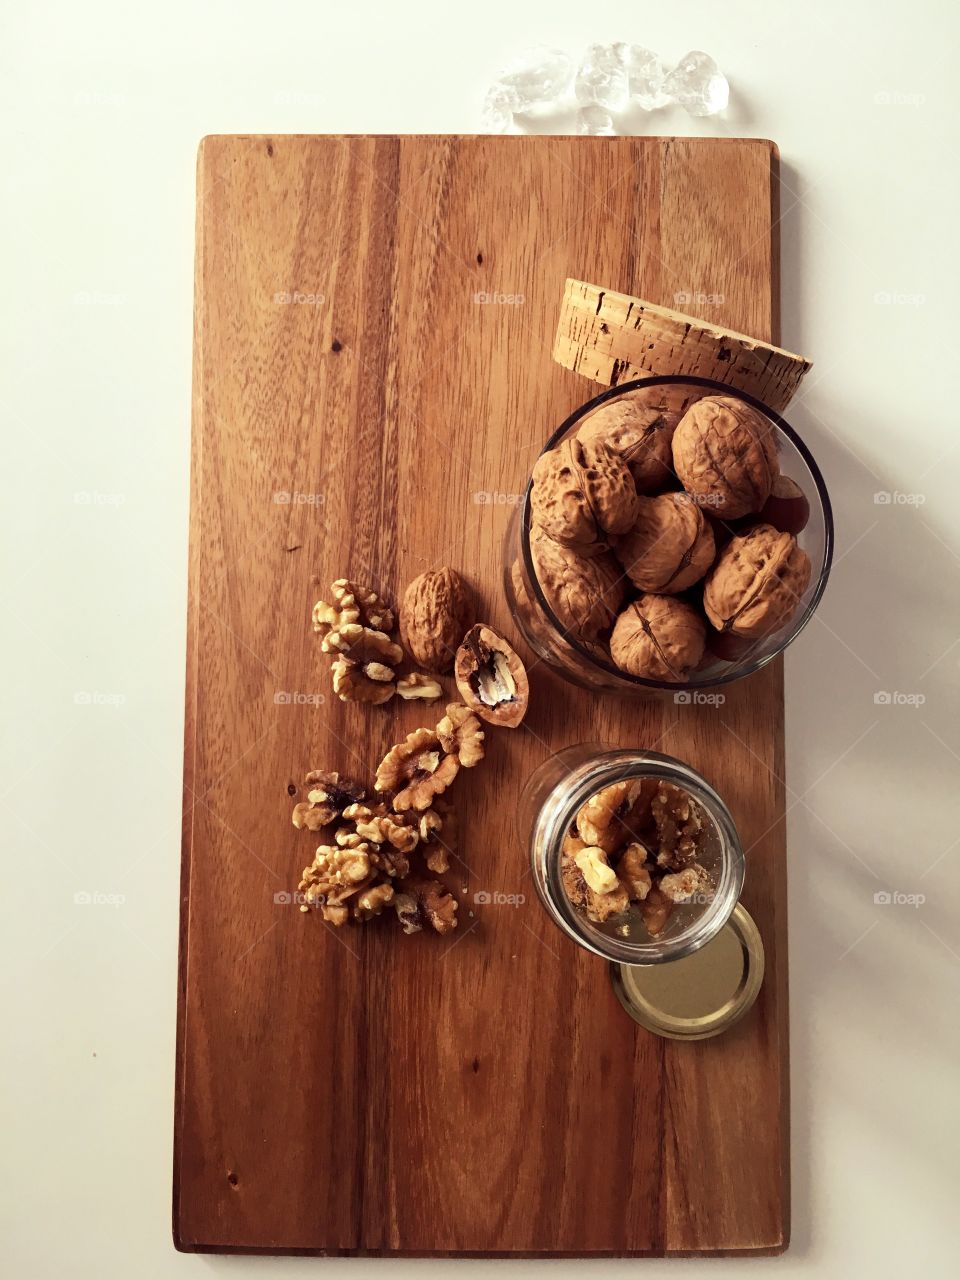 Walnuts prosessing point, all over the cutting board. Matching colors make simple and good looking pic.